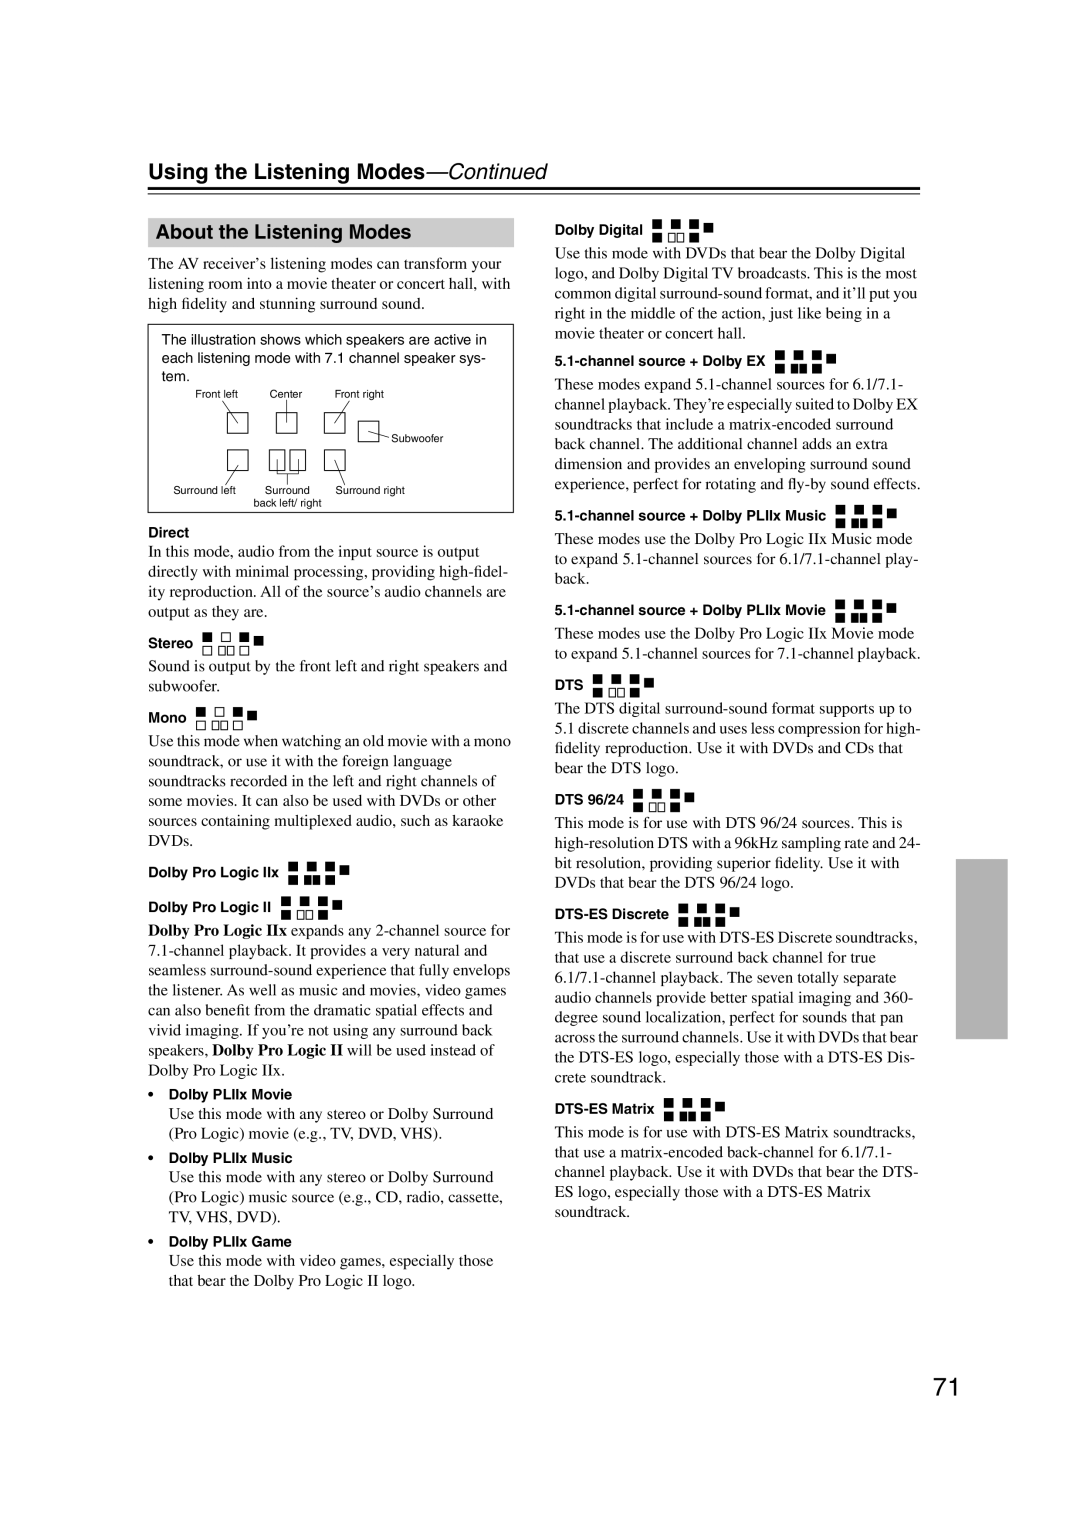 Onkyo HT-S5100 instruction manual About the Listening Modes, Using the Listening Modes—Continued 